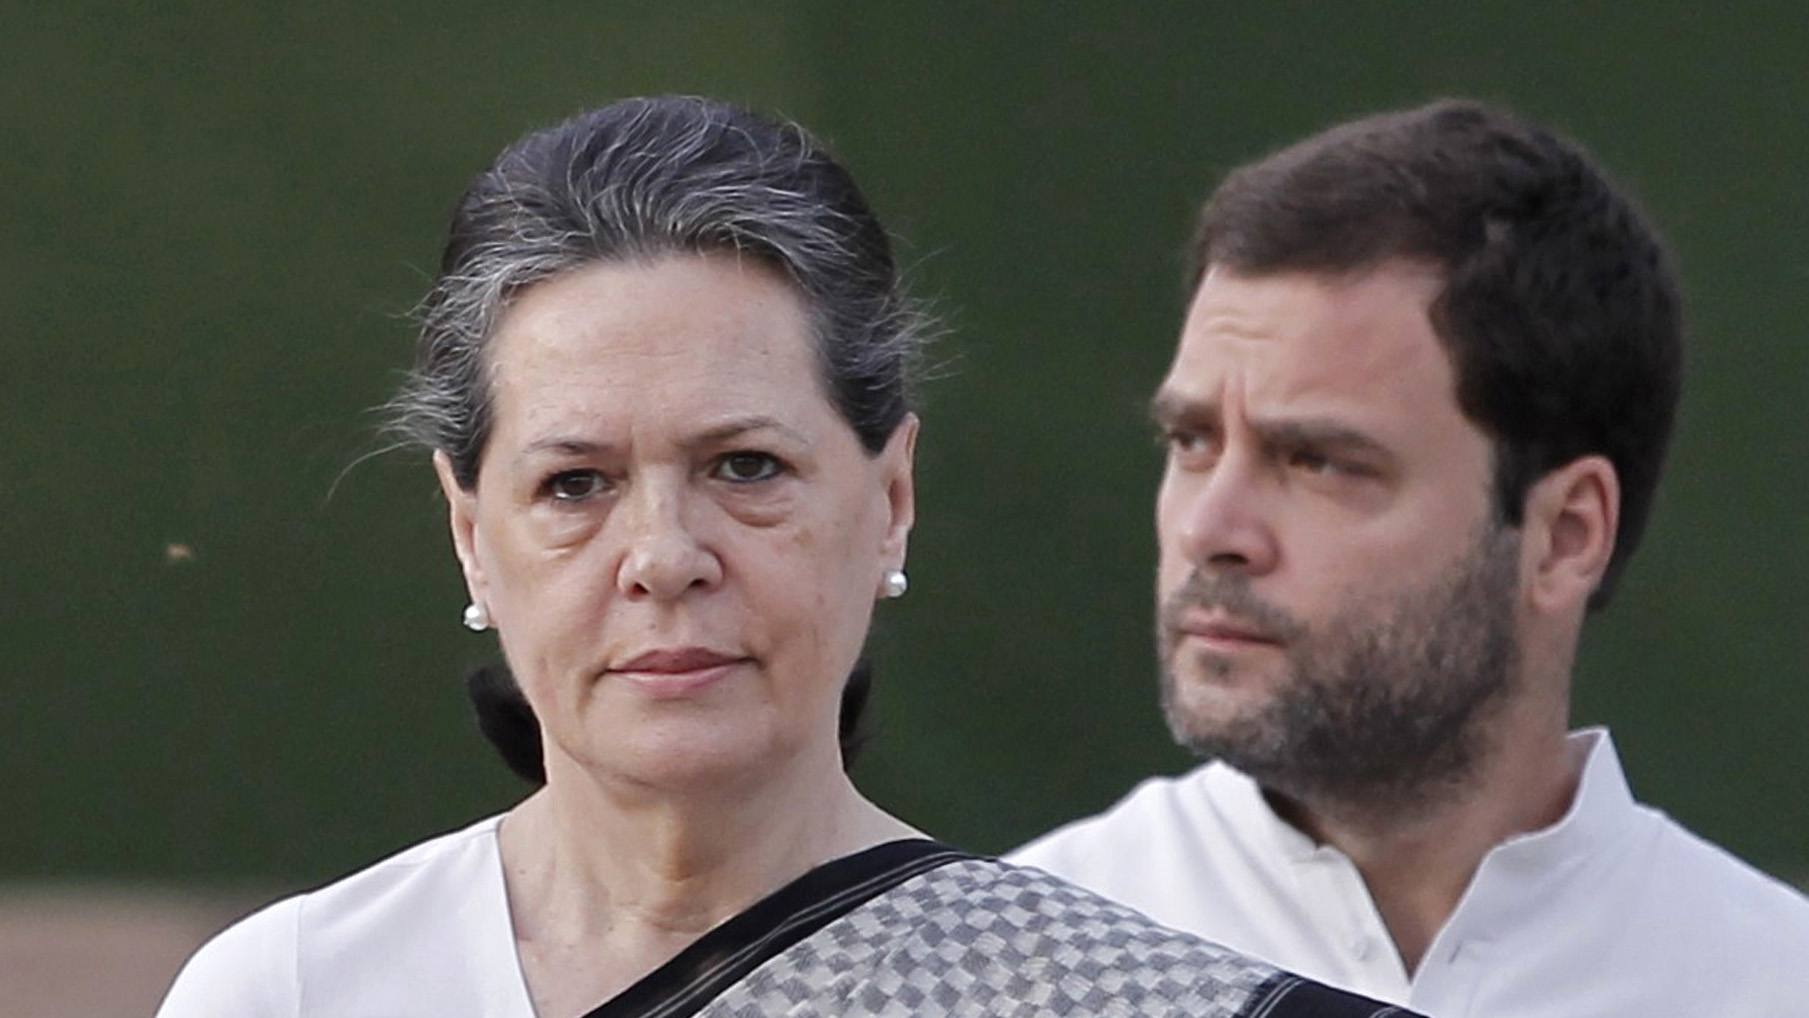 Chief of India's ruling Congress party Sonia Gandhi (L) pays tribute at her husband Rajiv Gandhi's memorial as her son and a lawmaker Rahul Gandhi watches on the 21st anniversary of the former Prime Minister's death in New Delhi May 21, 2012. Rajiv Gandhi was killed by a female suicide bomber during election campaigning on May 21, 1991. REUTERS/Adnan Abidi (INDIA - Tags: POLITICS OBITUARY ANNIVERSARY) - RTR32E0R